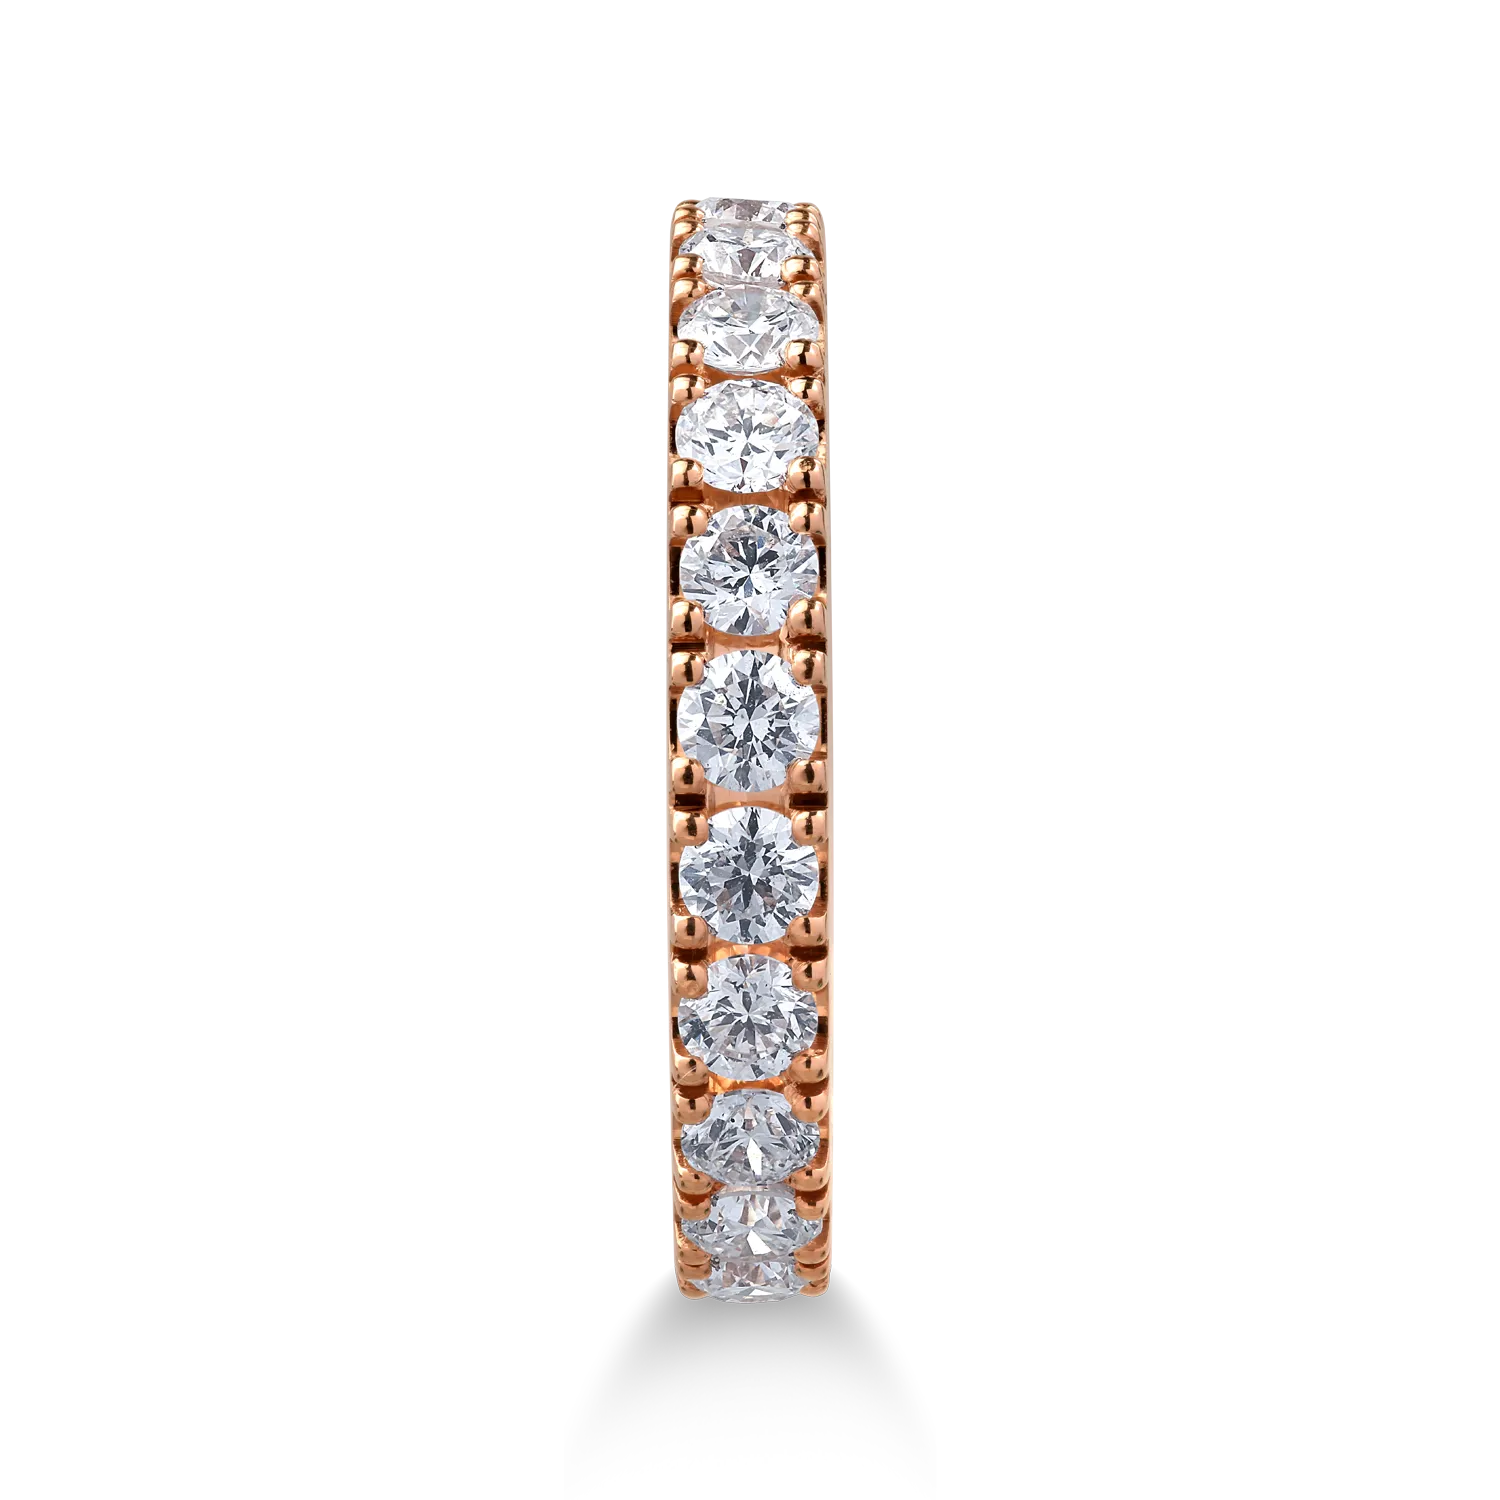 18K rose gold ring with 1.25ct diamonds